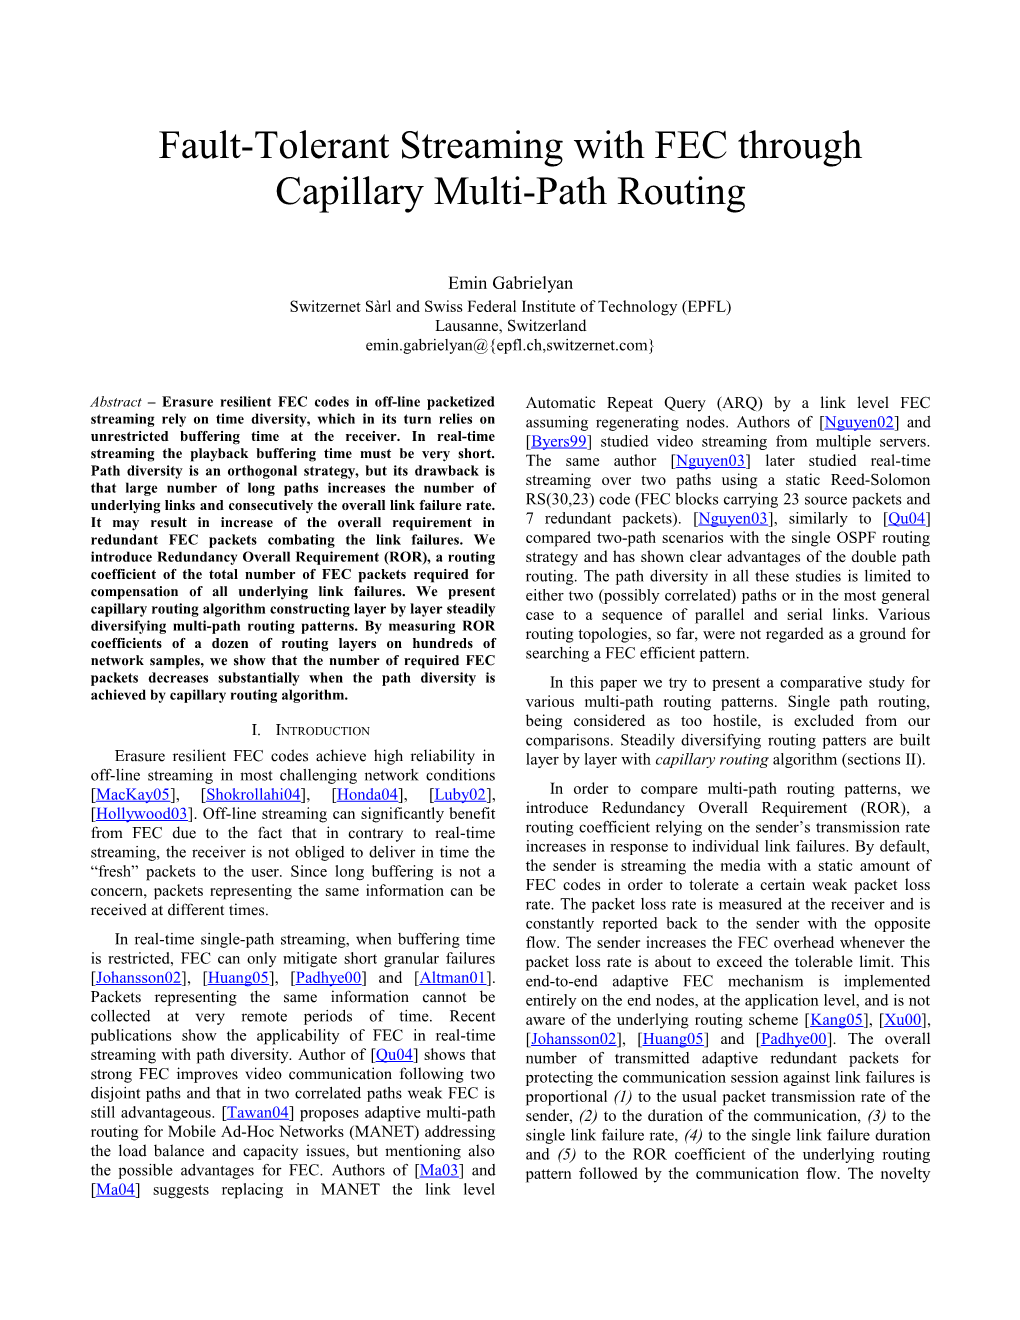 Fault-Tolerant Streaming with FEC Through Capillary Multi-Path Routing